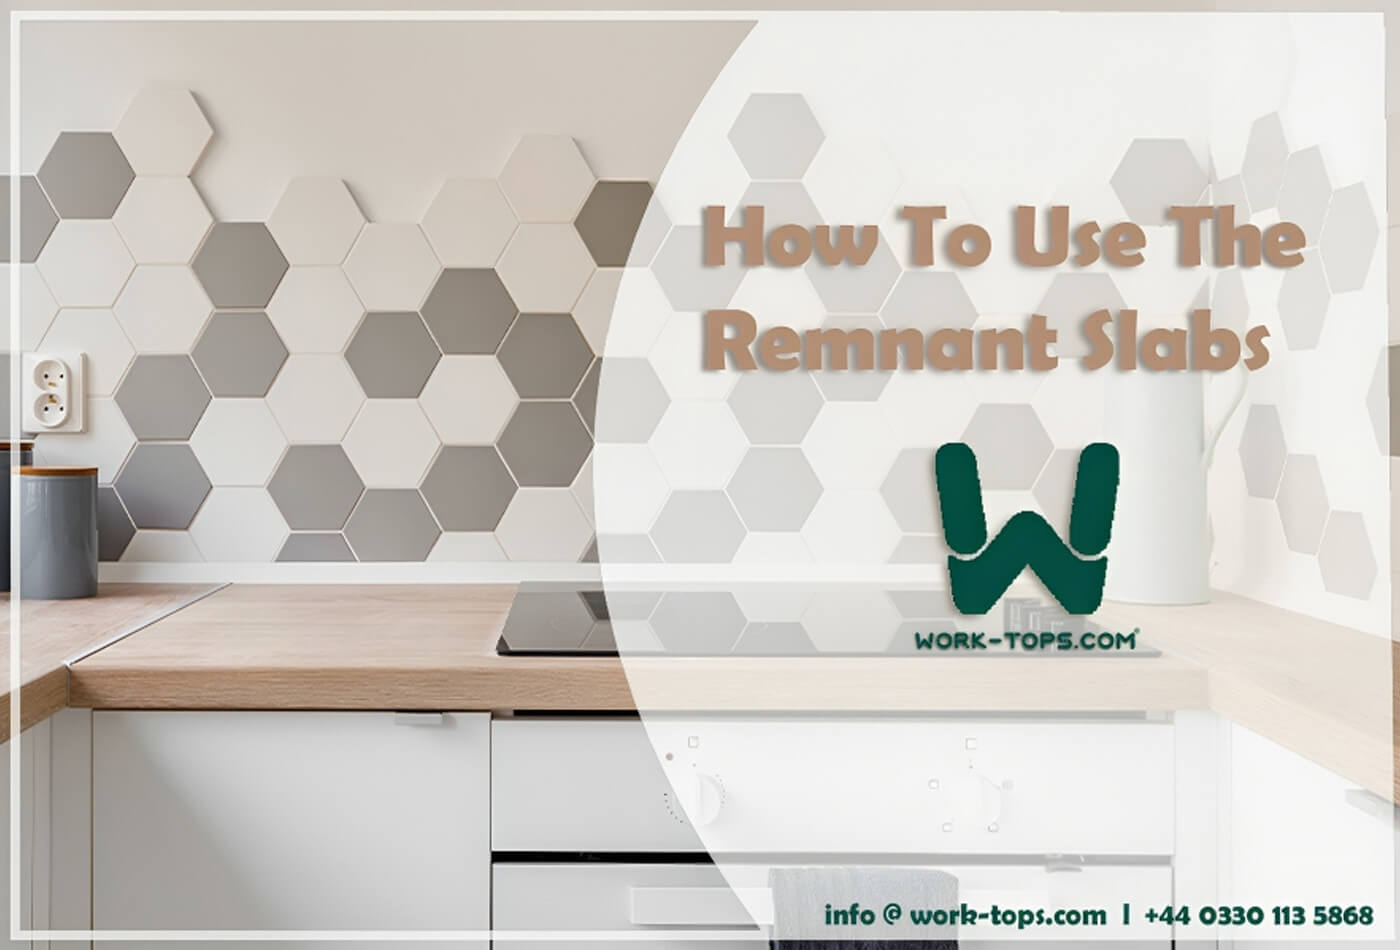 How To Use The Remnant Slabs Sensibly